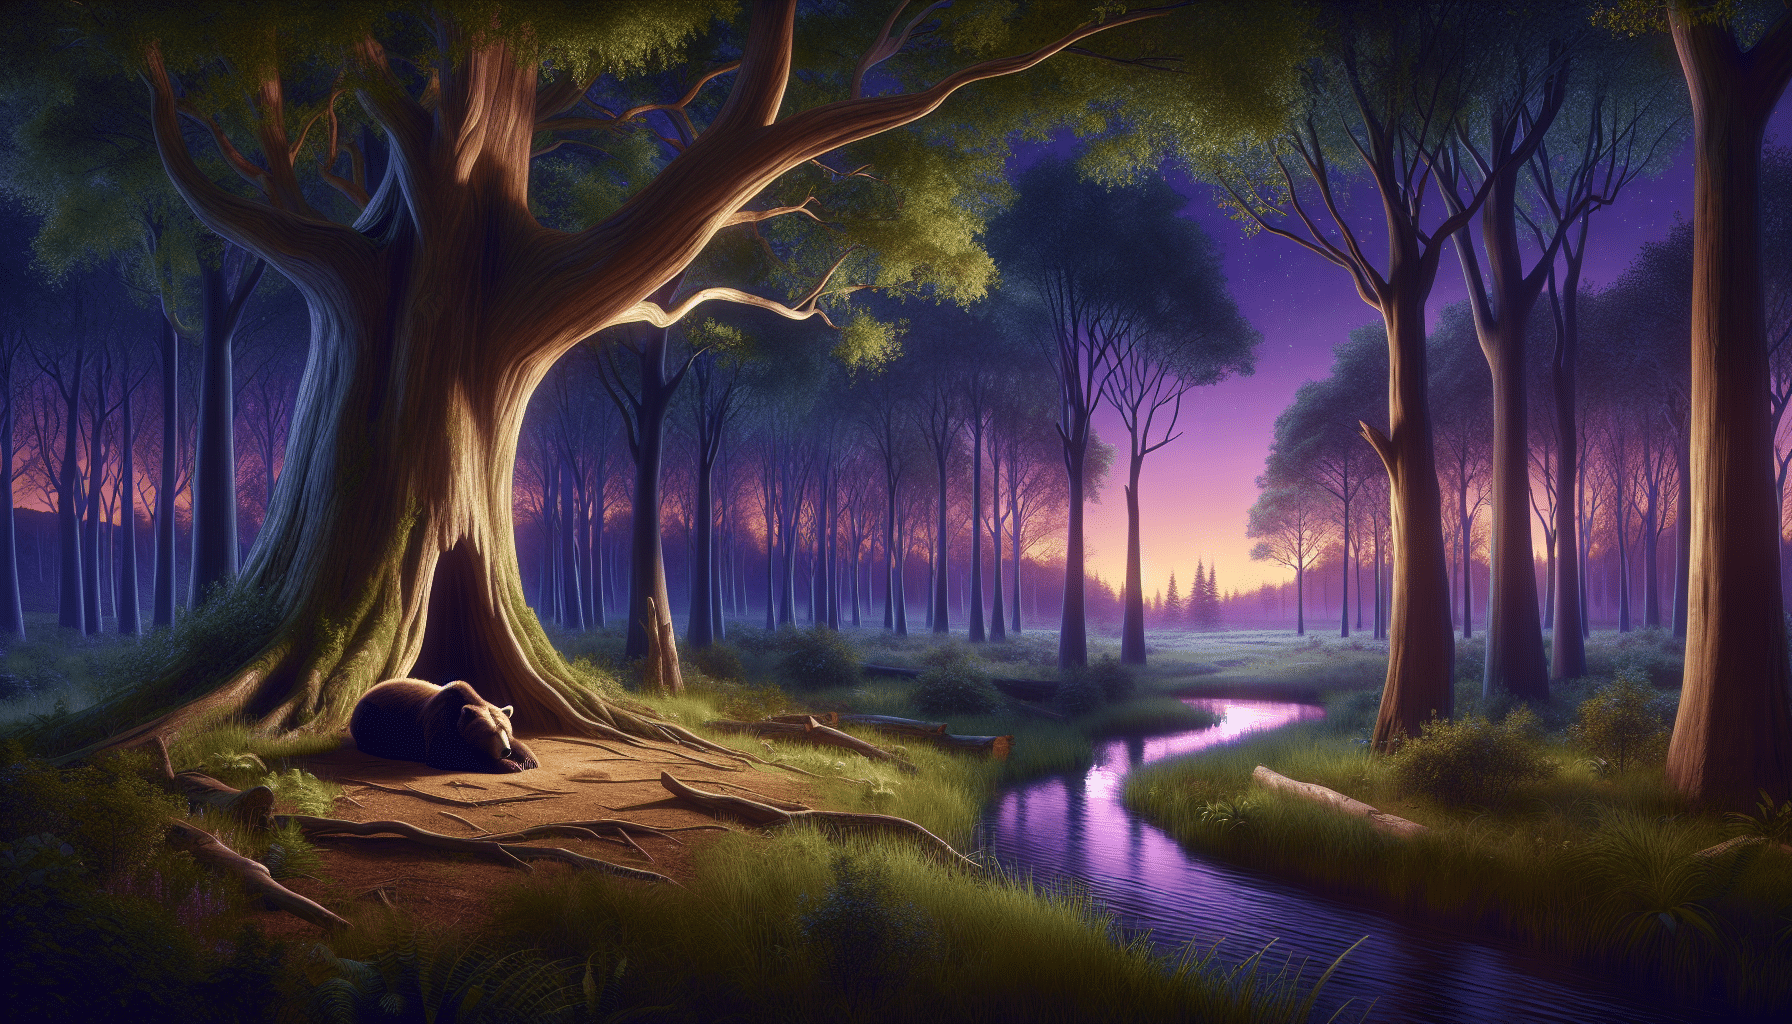 Depict an unoccupied tranquil forest scene at twilight, with a wide tree with a spacious hollow large enough for a brown bear to sleep in. The trees are towering with leaves rustling in the soft wind. There's a clear stream curving through the scene, reflecting the purples and oranges of the sunset. The air is filled with the silent tranquility of nocturnal nature, untouched by human presence, providing a perfect natural habitat for the brown bear to take its slumber. There are no textual elements, brand names or logos present in this serene depiction of nature.